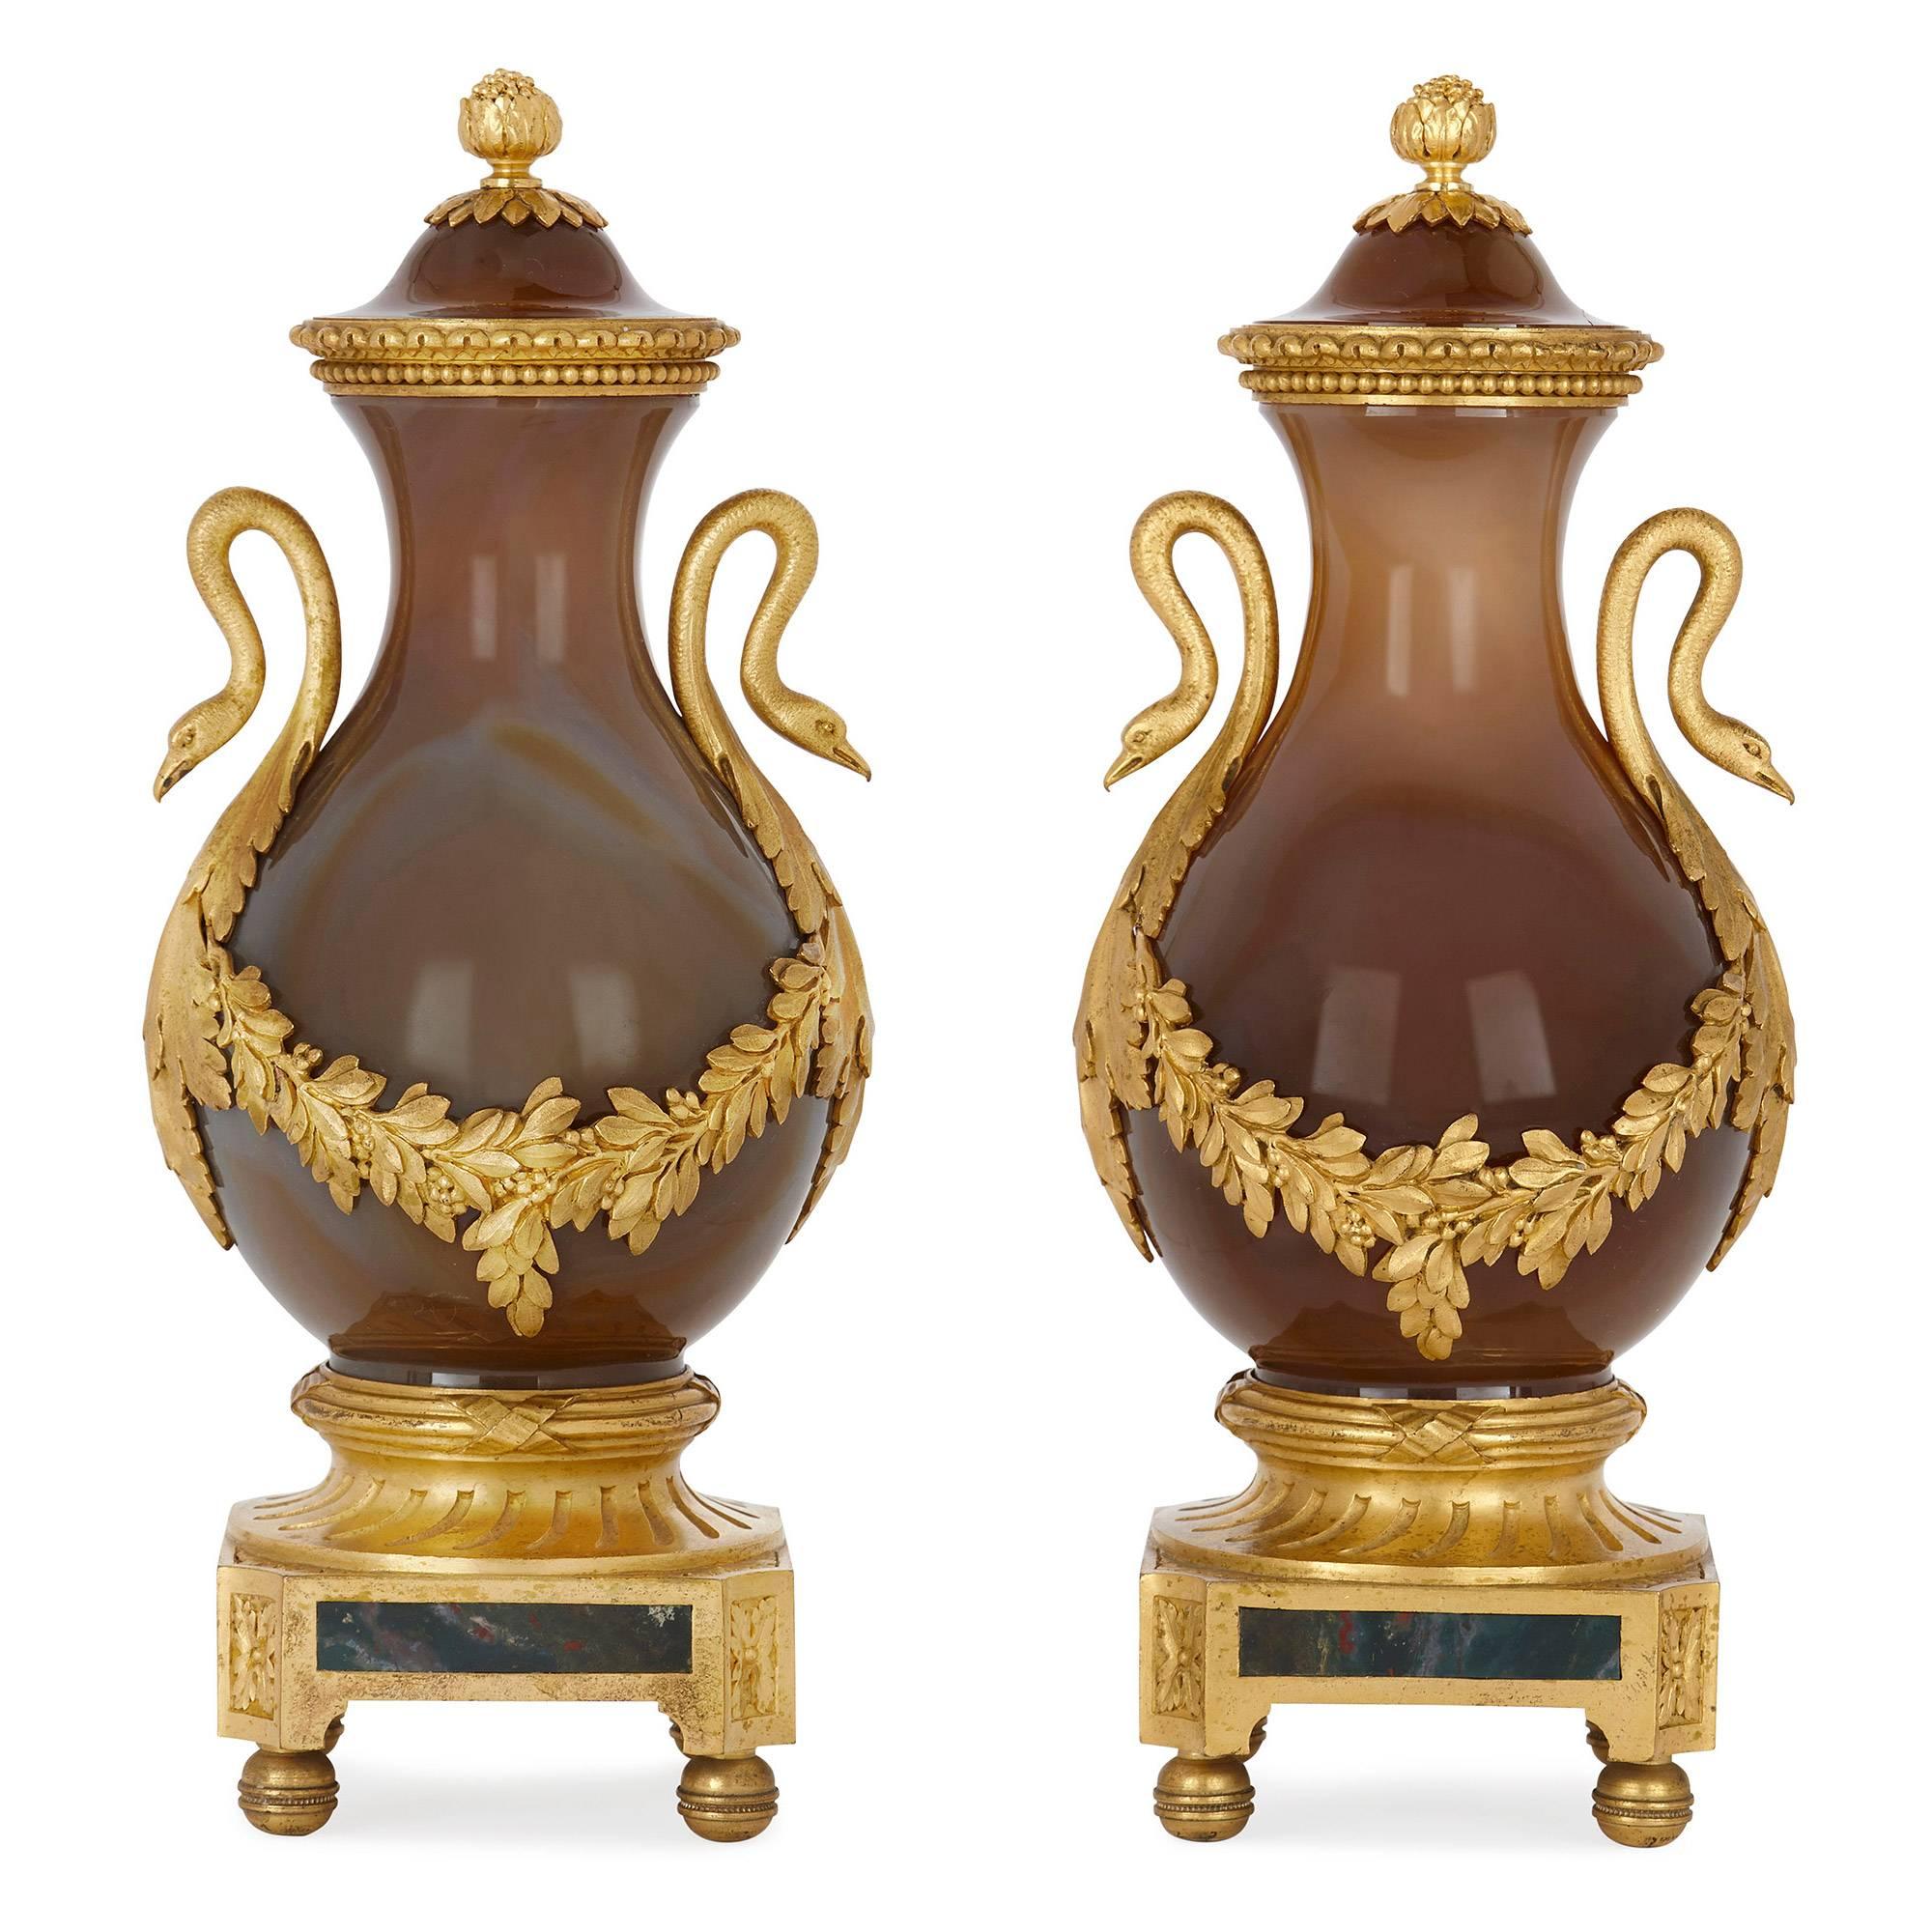 These charming agate vases are delicate in size and elegant in proportion, and were formerly in the important collection of Lord Astor of Hever, the famed English publisher of the Times. 

The vases feature curved, ovoid bodies with waisted necks